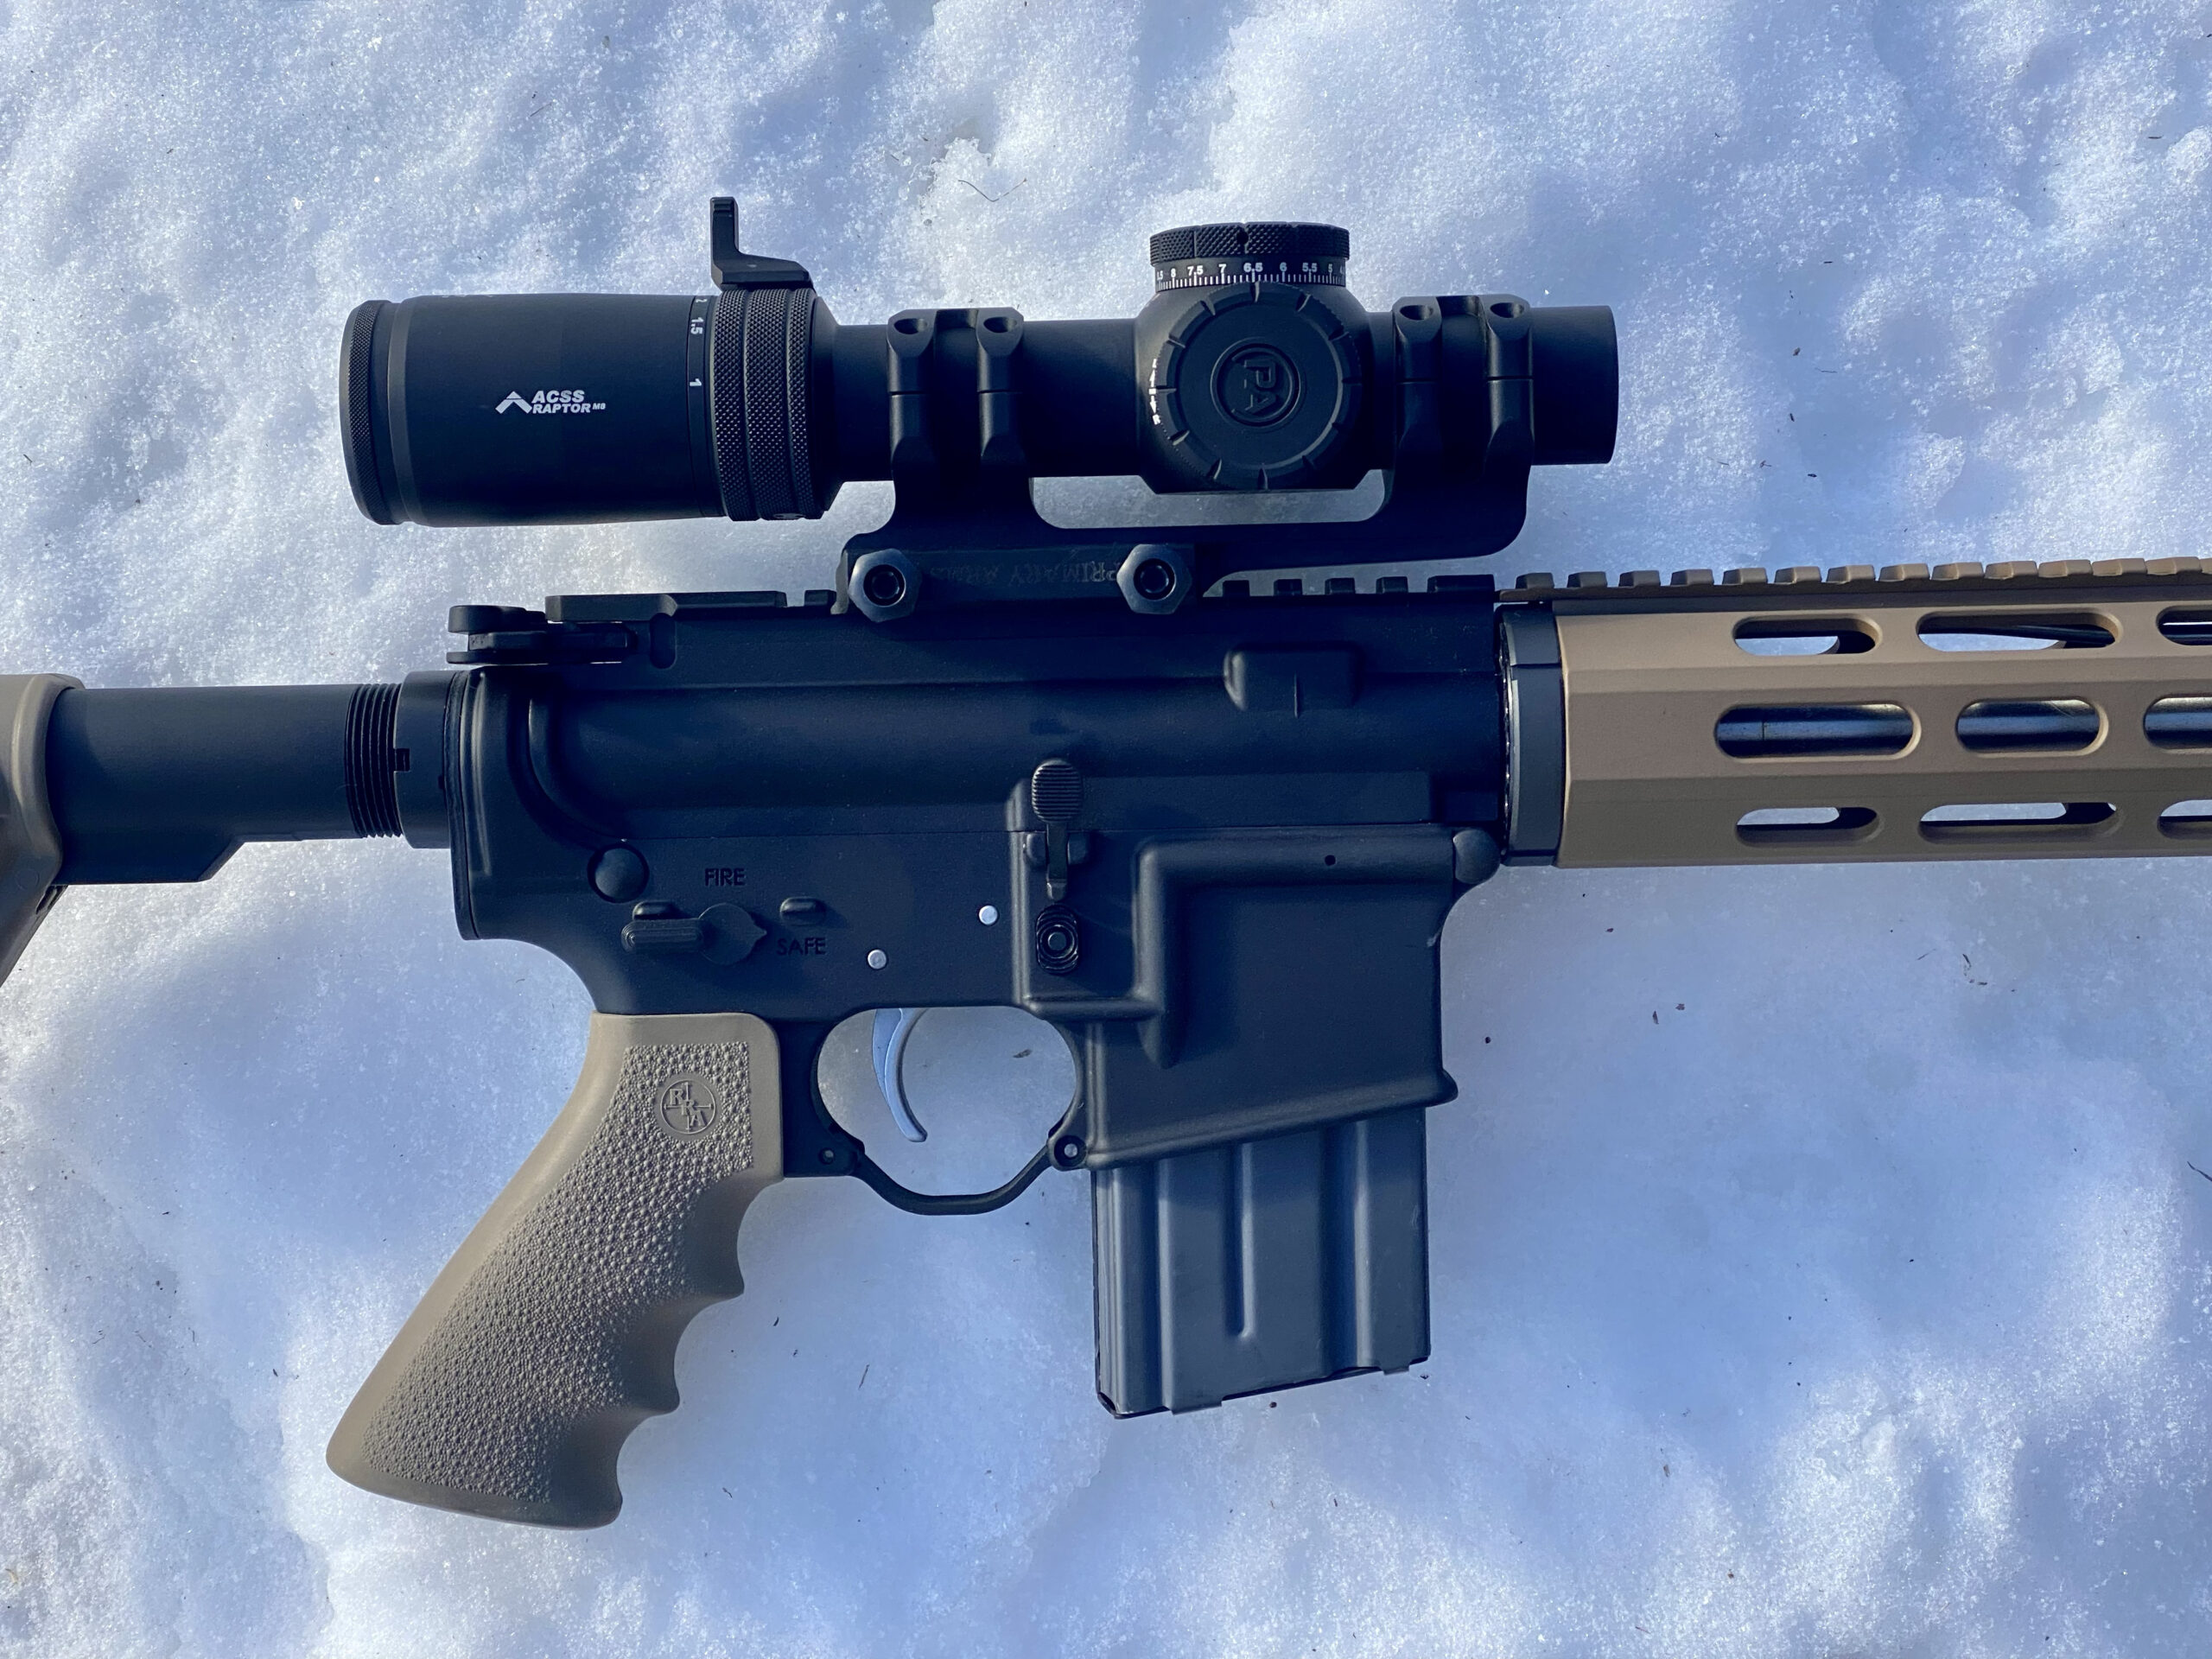 The Primary Arms PLx 1-8x24 was the best precision LPVO during testing.